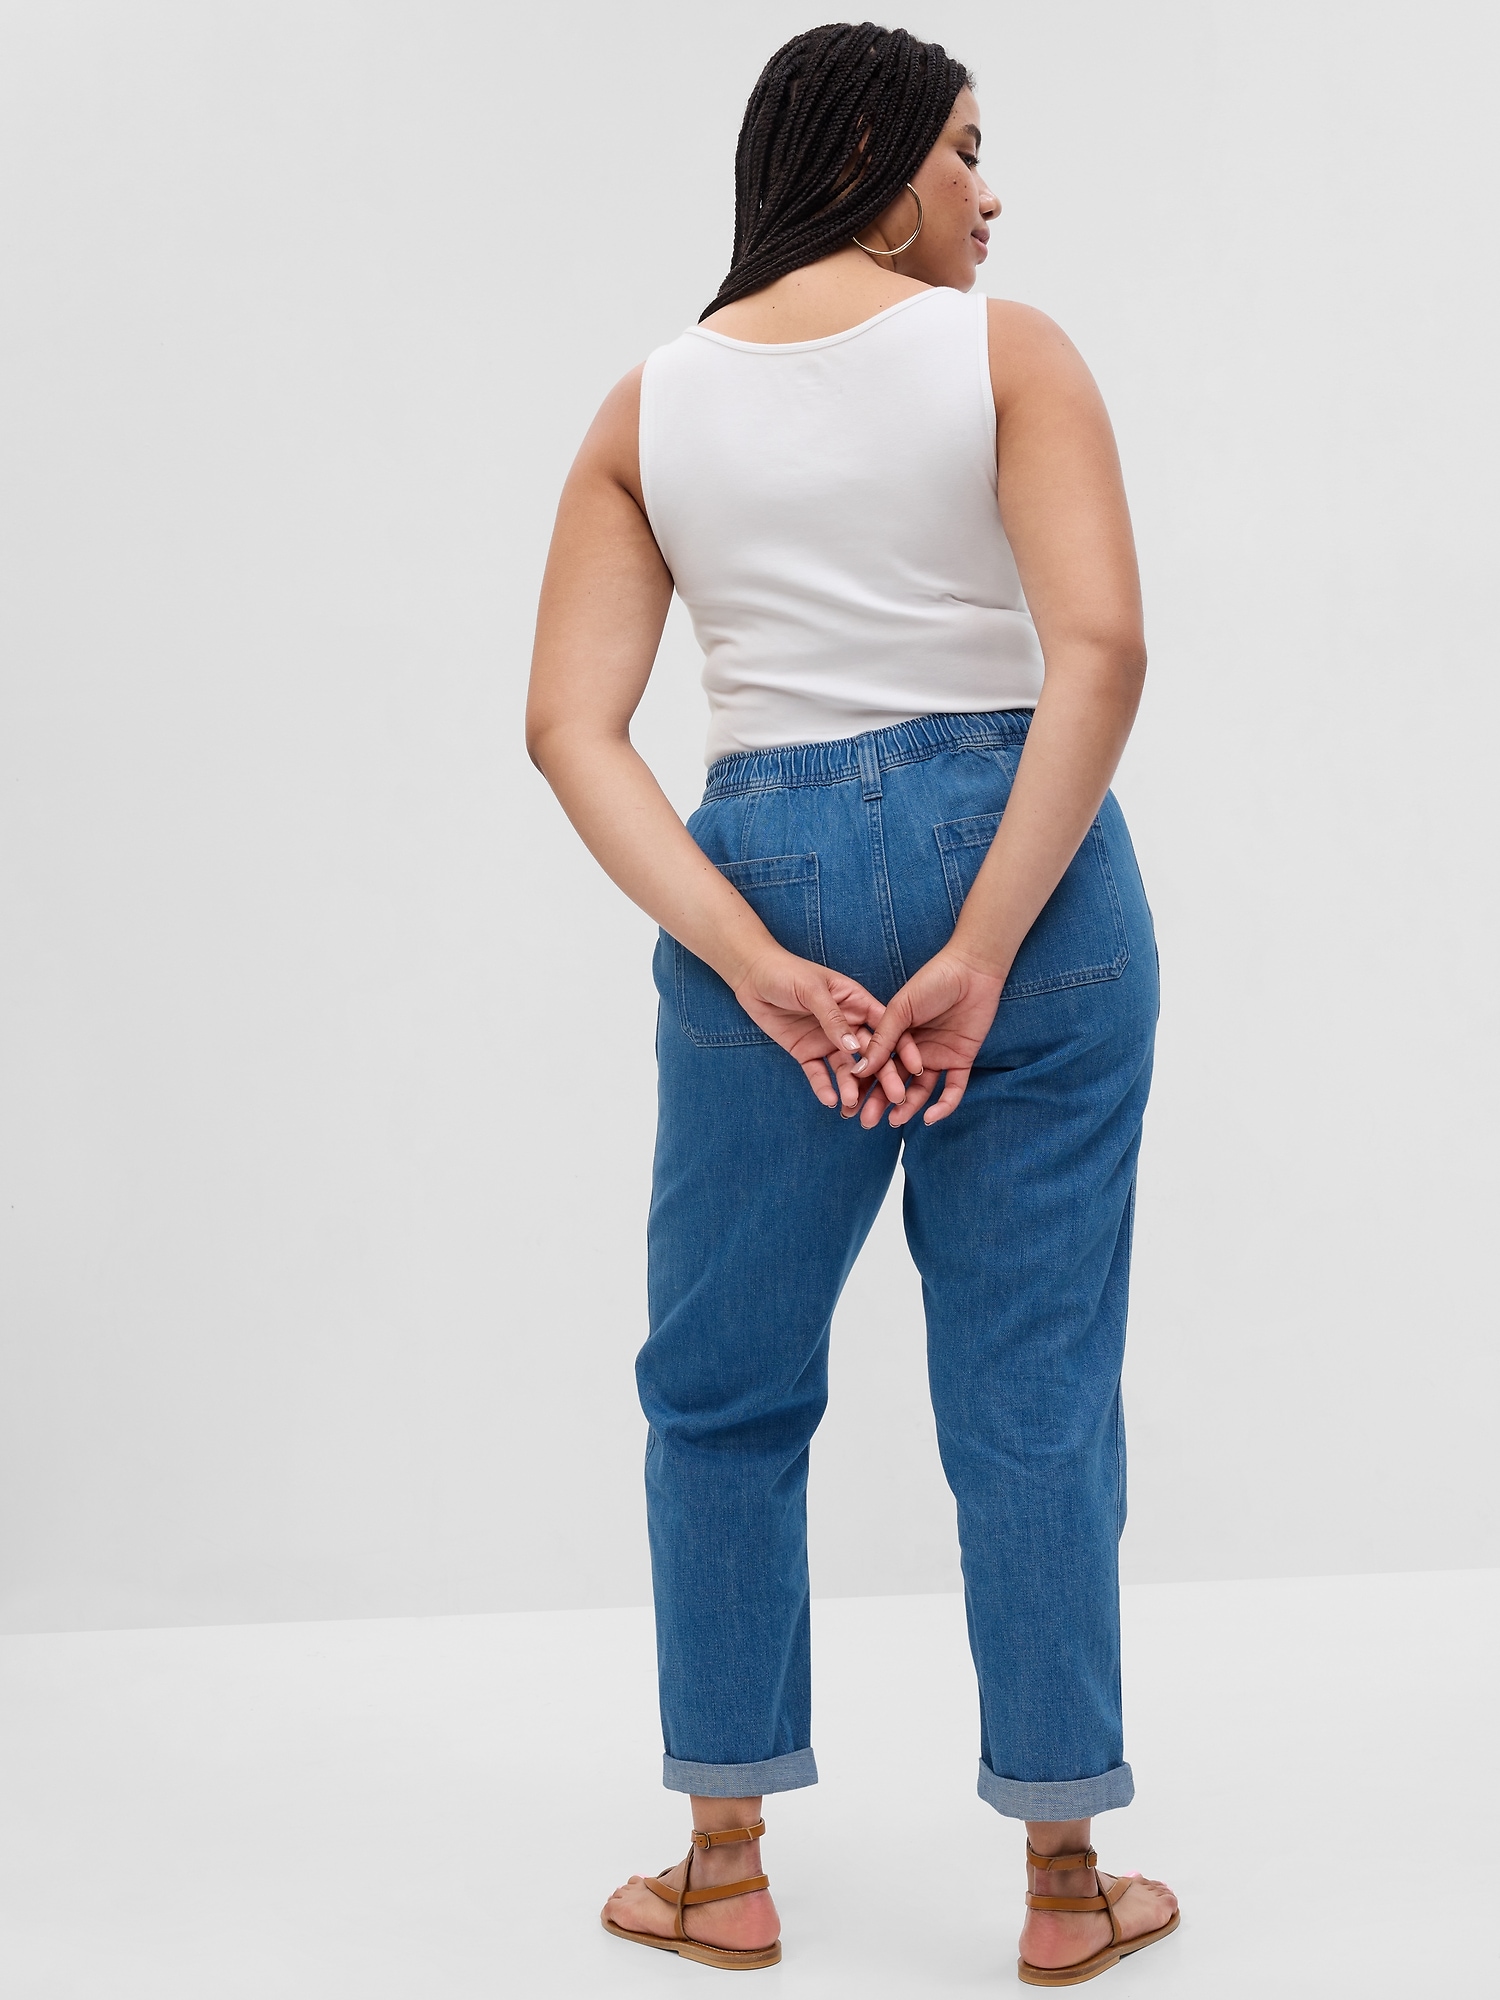 Plus Size Simple High Rise Mom Jeans